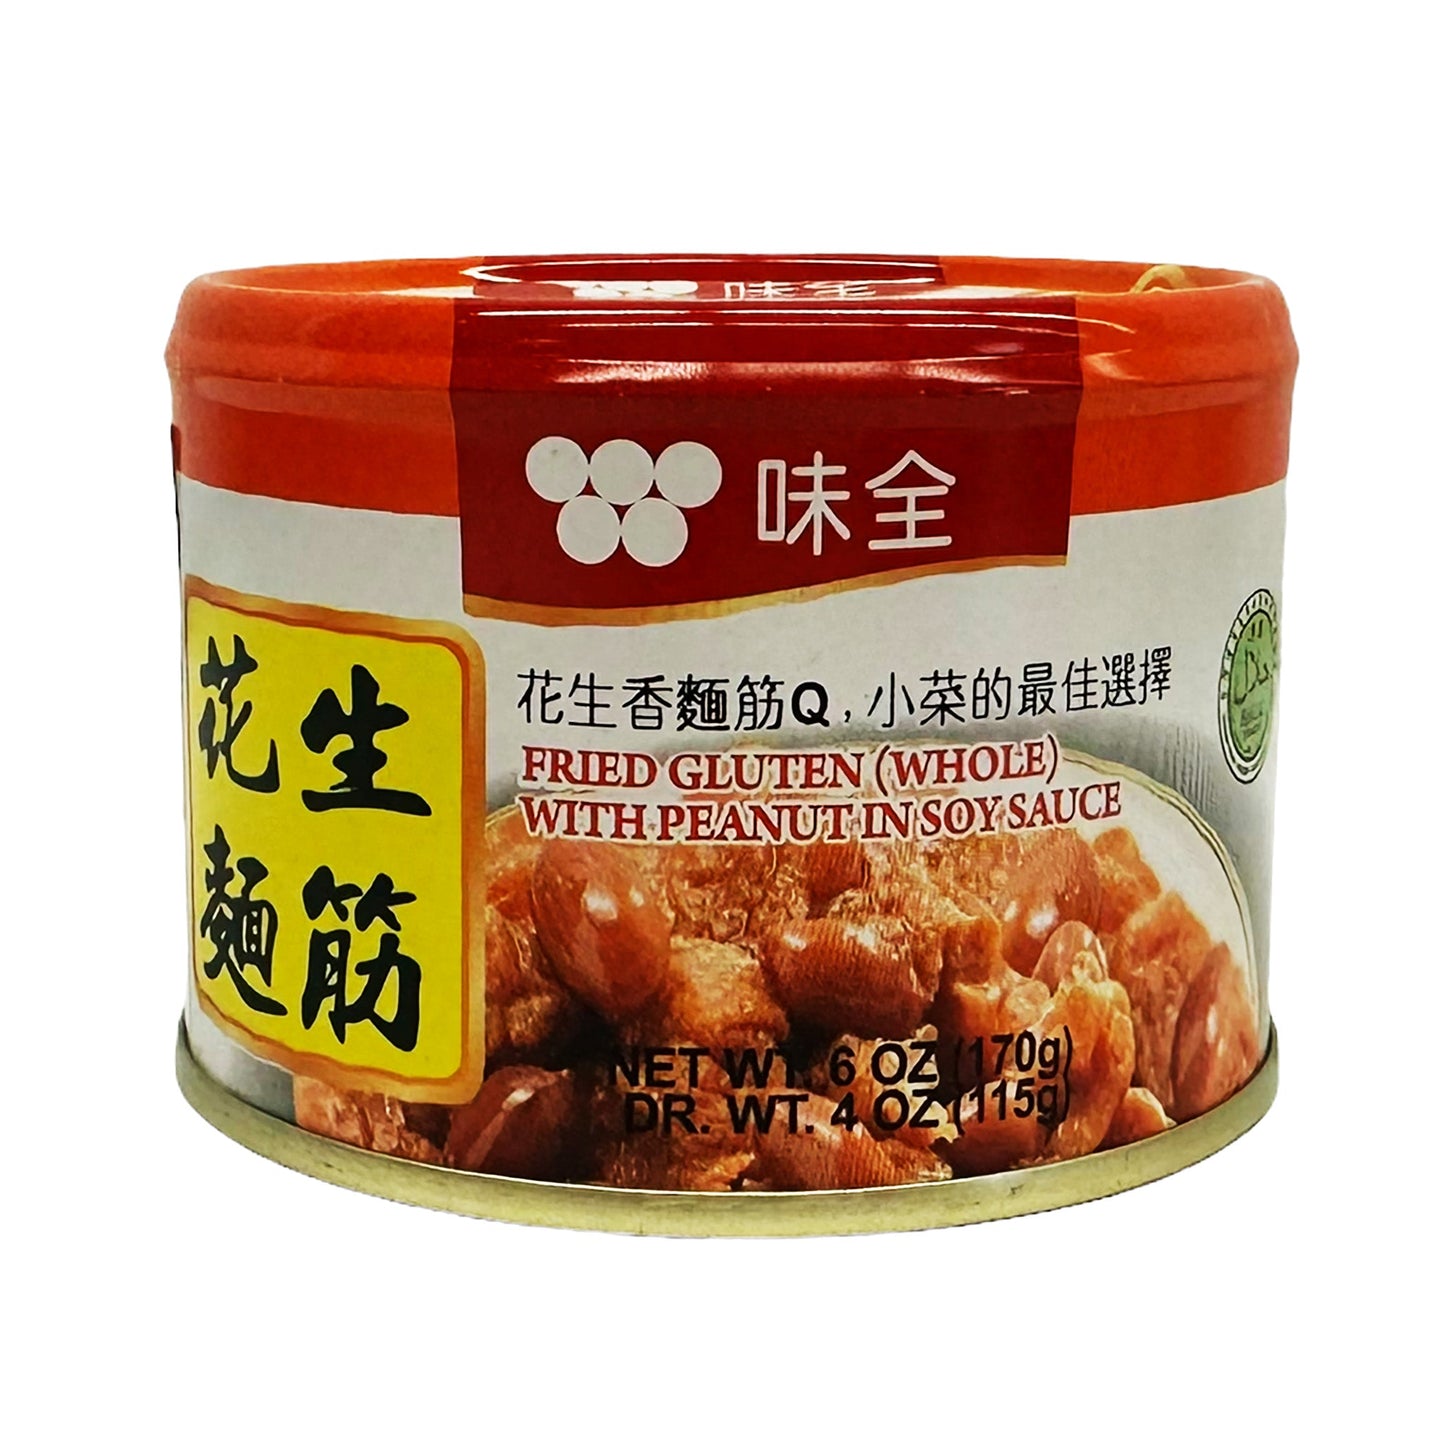 Front graphic image of Wei Chuan Fried Gluten in Soy Sauce with Peanuts 6oz